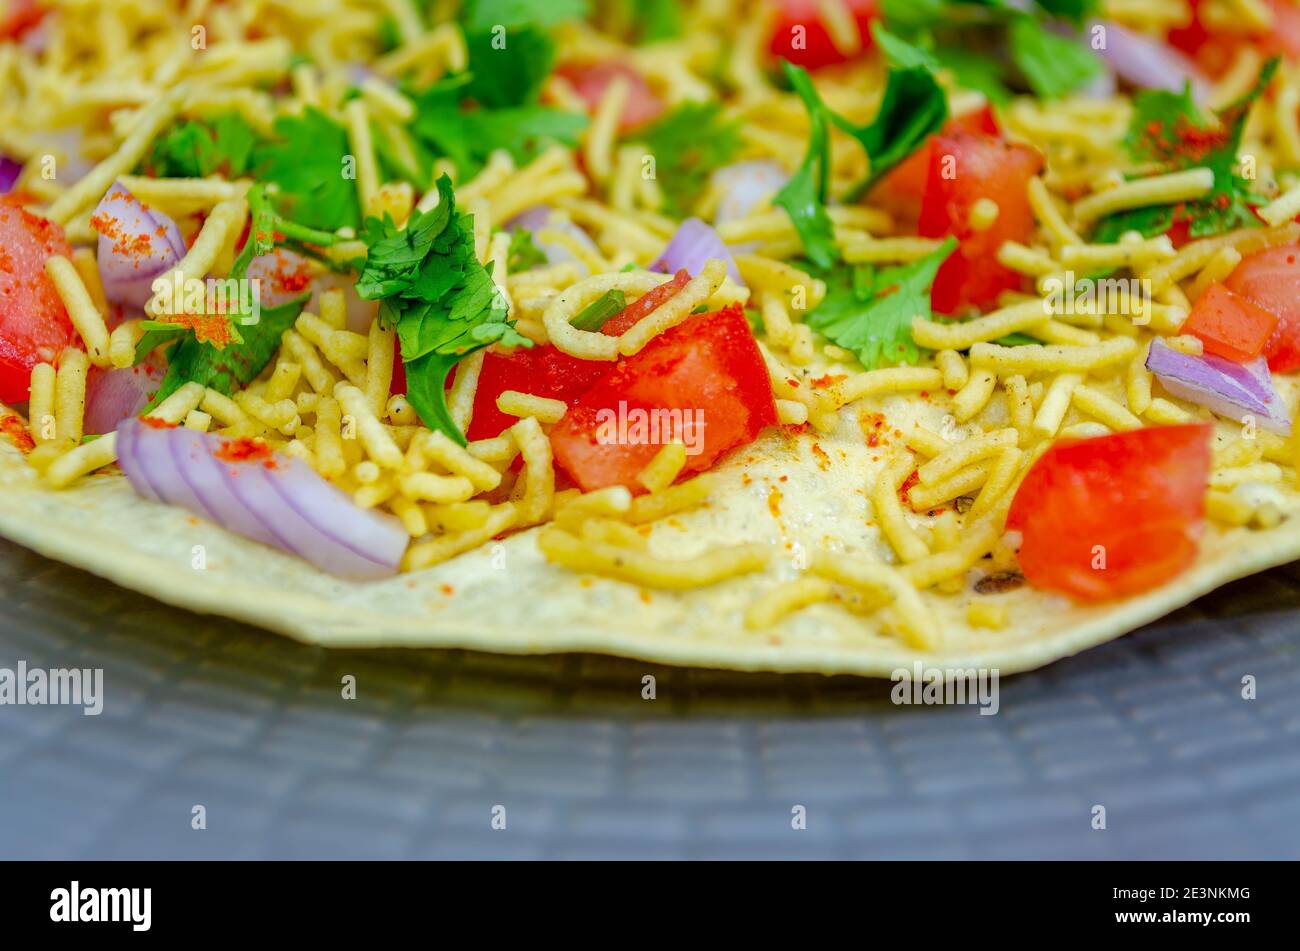 North Indian Snacks Masala Papad spread with sev, tomato, onions and Coriander leaves Stock Photo